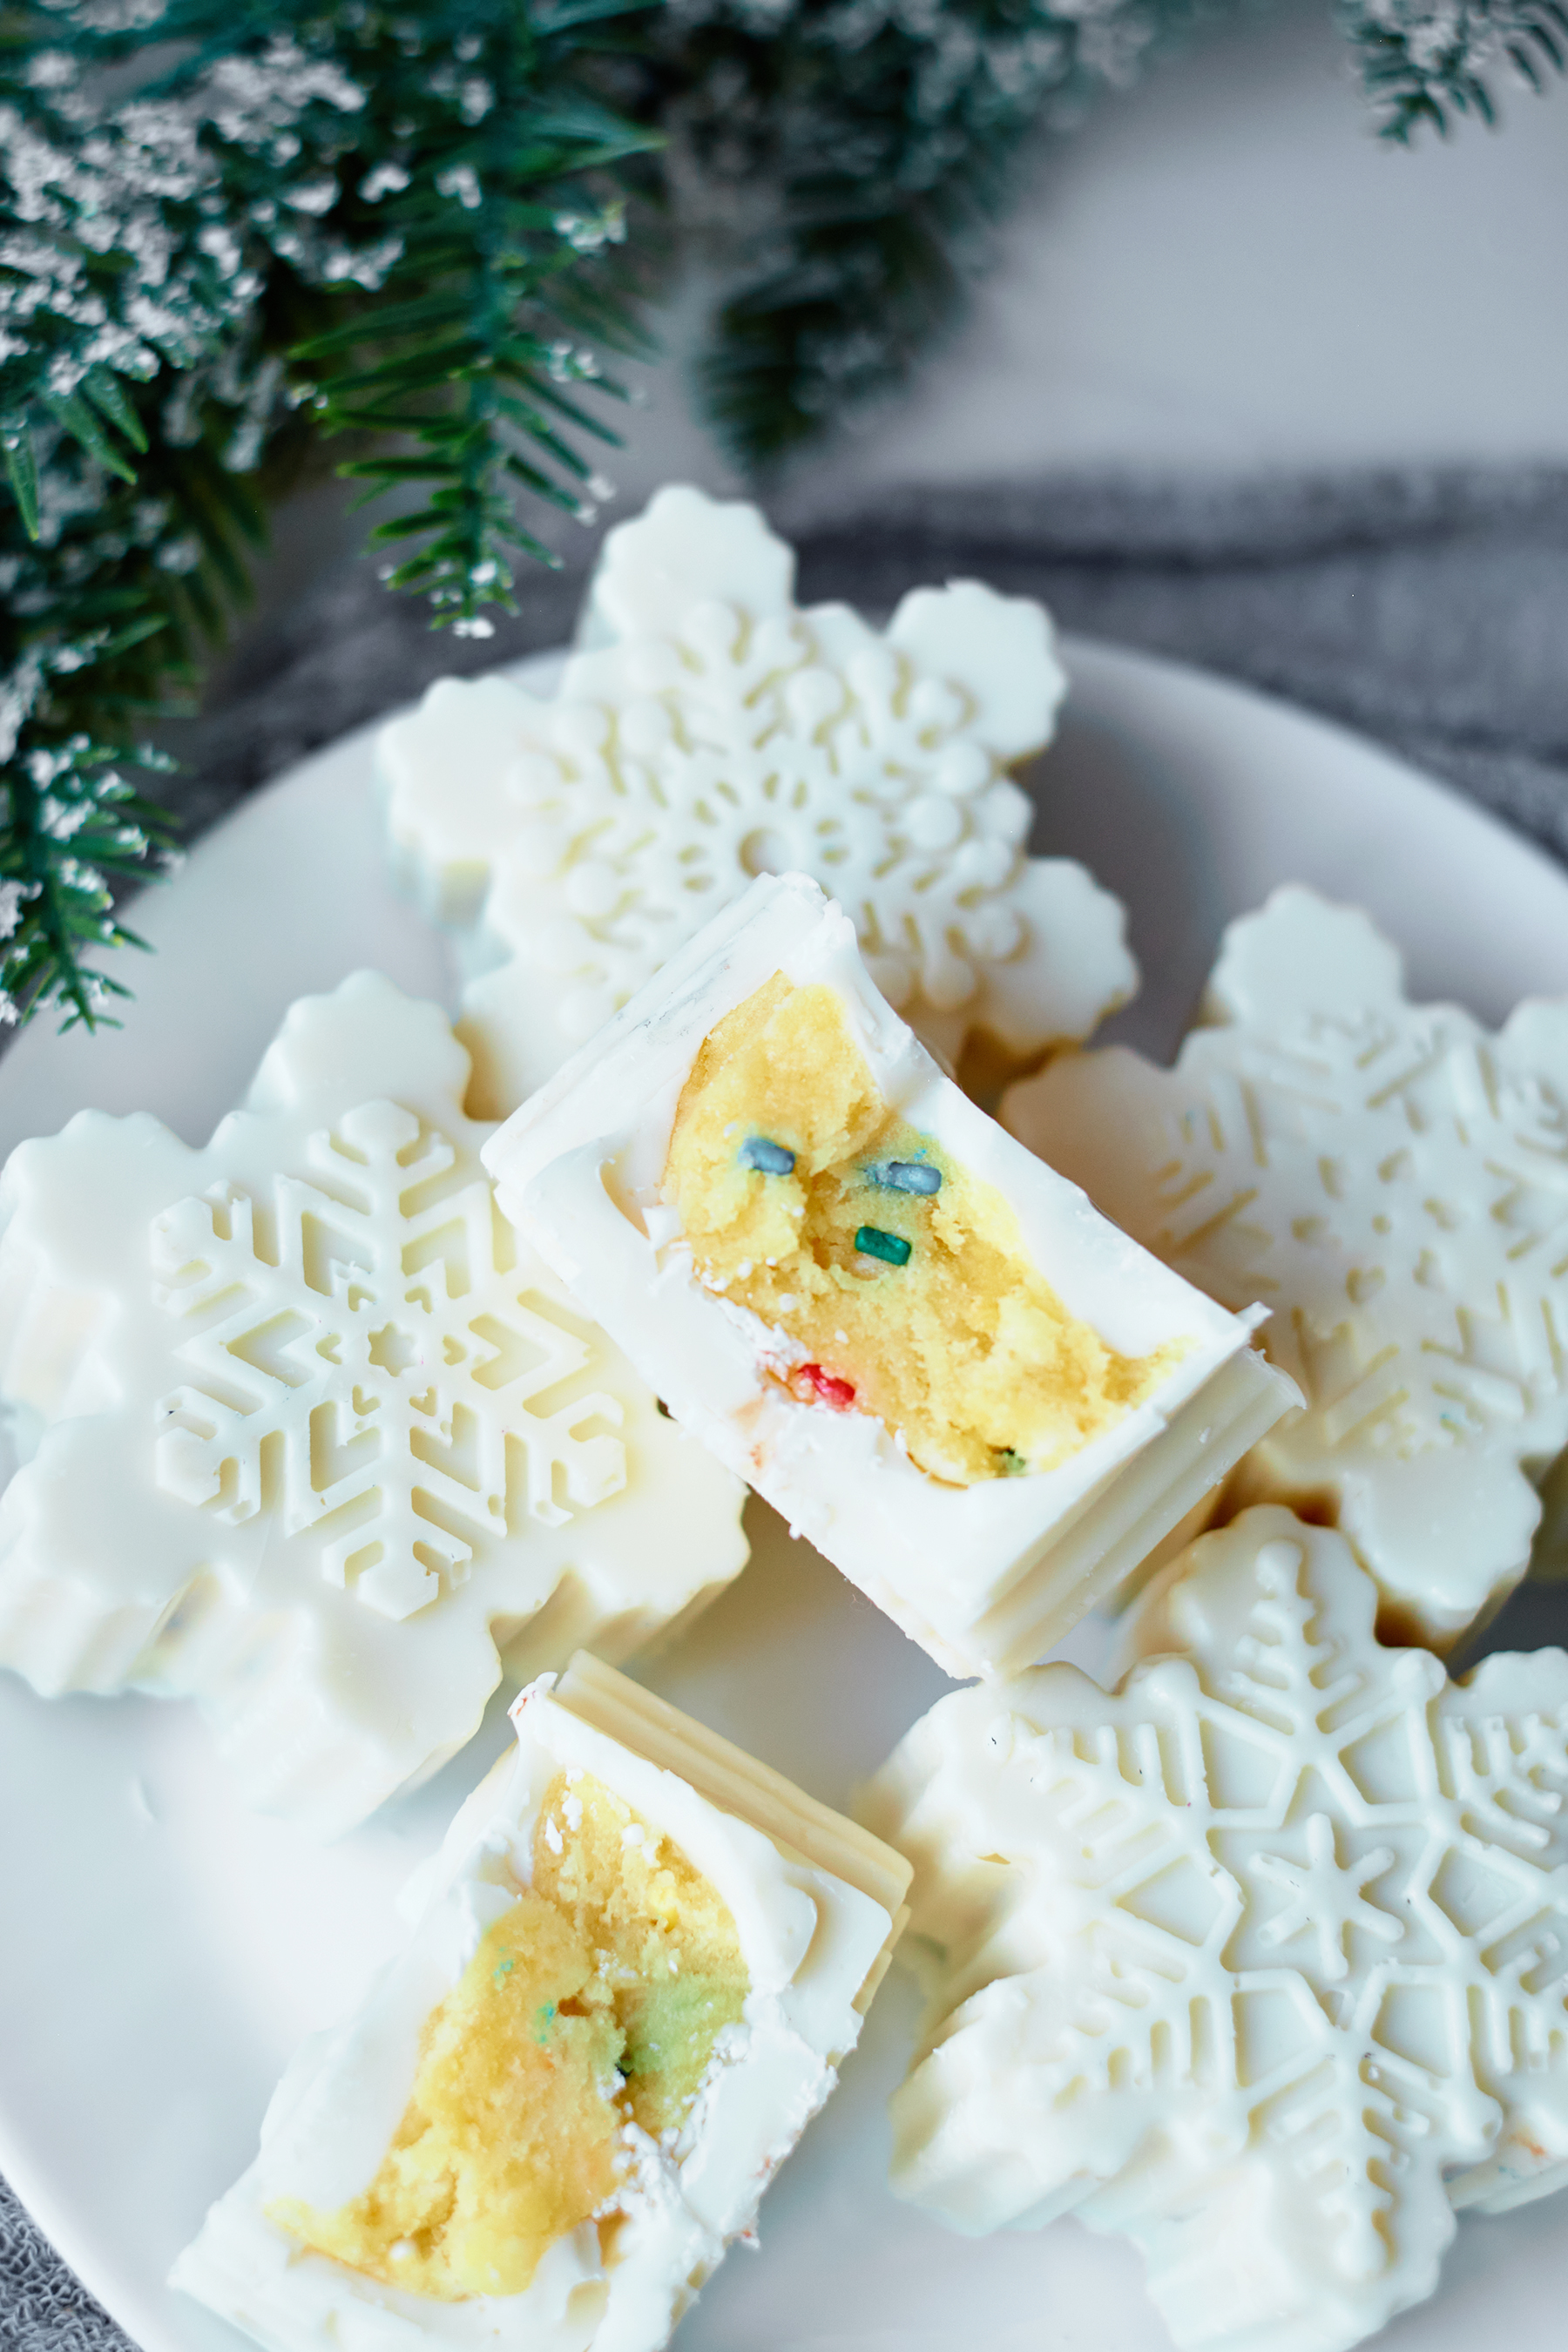 Details about   Forms DIY Silicone Baking Cake Molds Christmas Xmas Snowflake Shape Cake Mold 